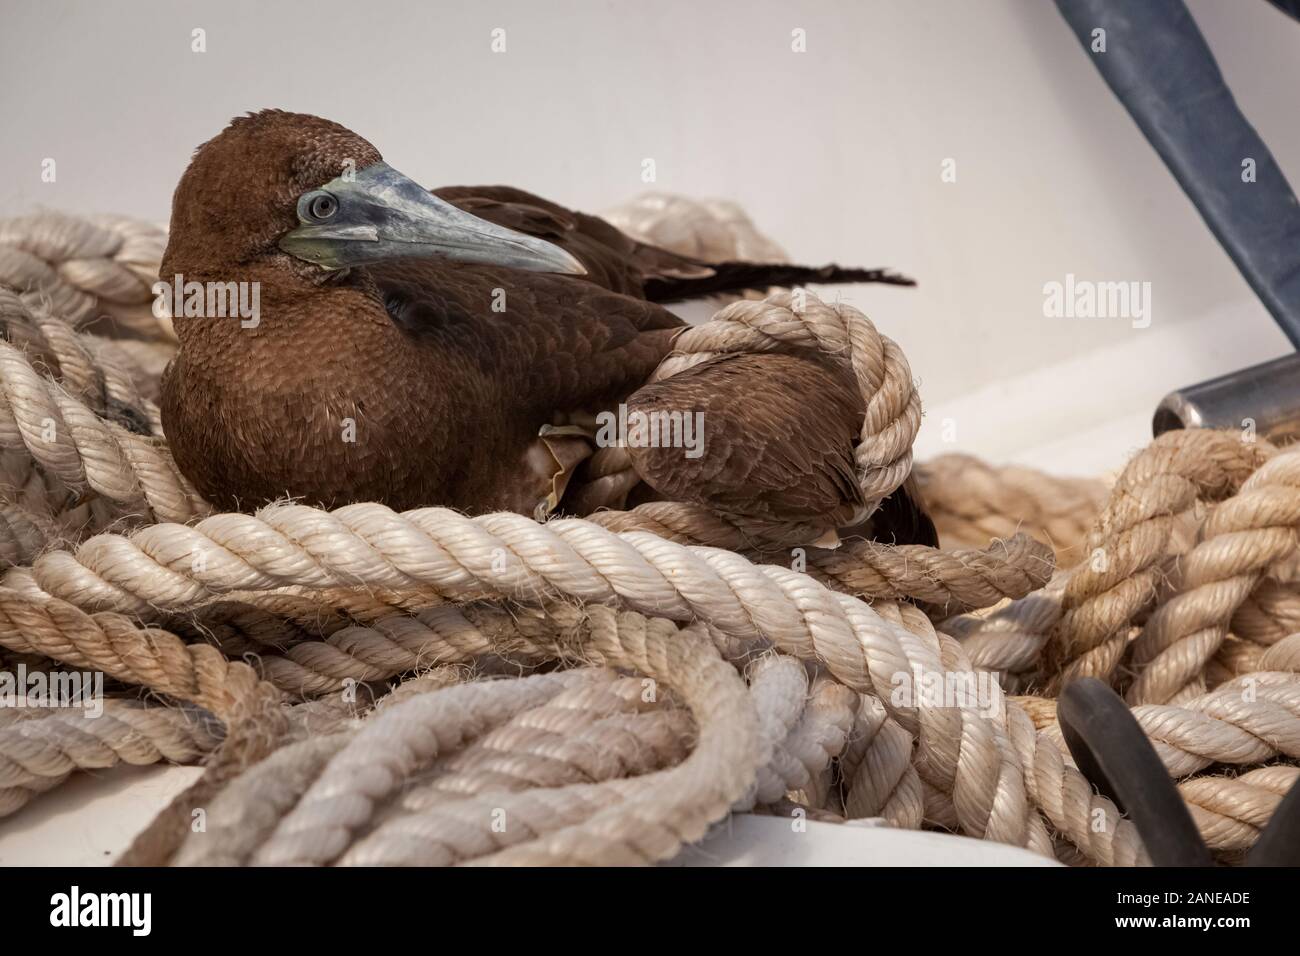 juvenile brown booby bird, Seabird trapped its wing on white hemp ship rope, close up and selective focus view, North Queensland Coasts Australia Stock Photo